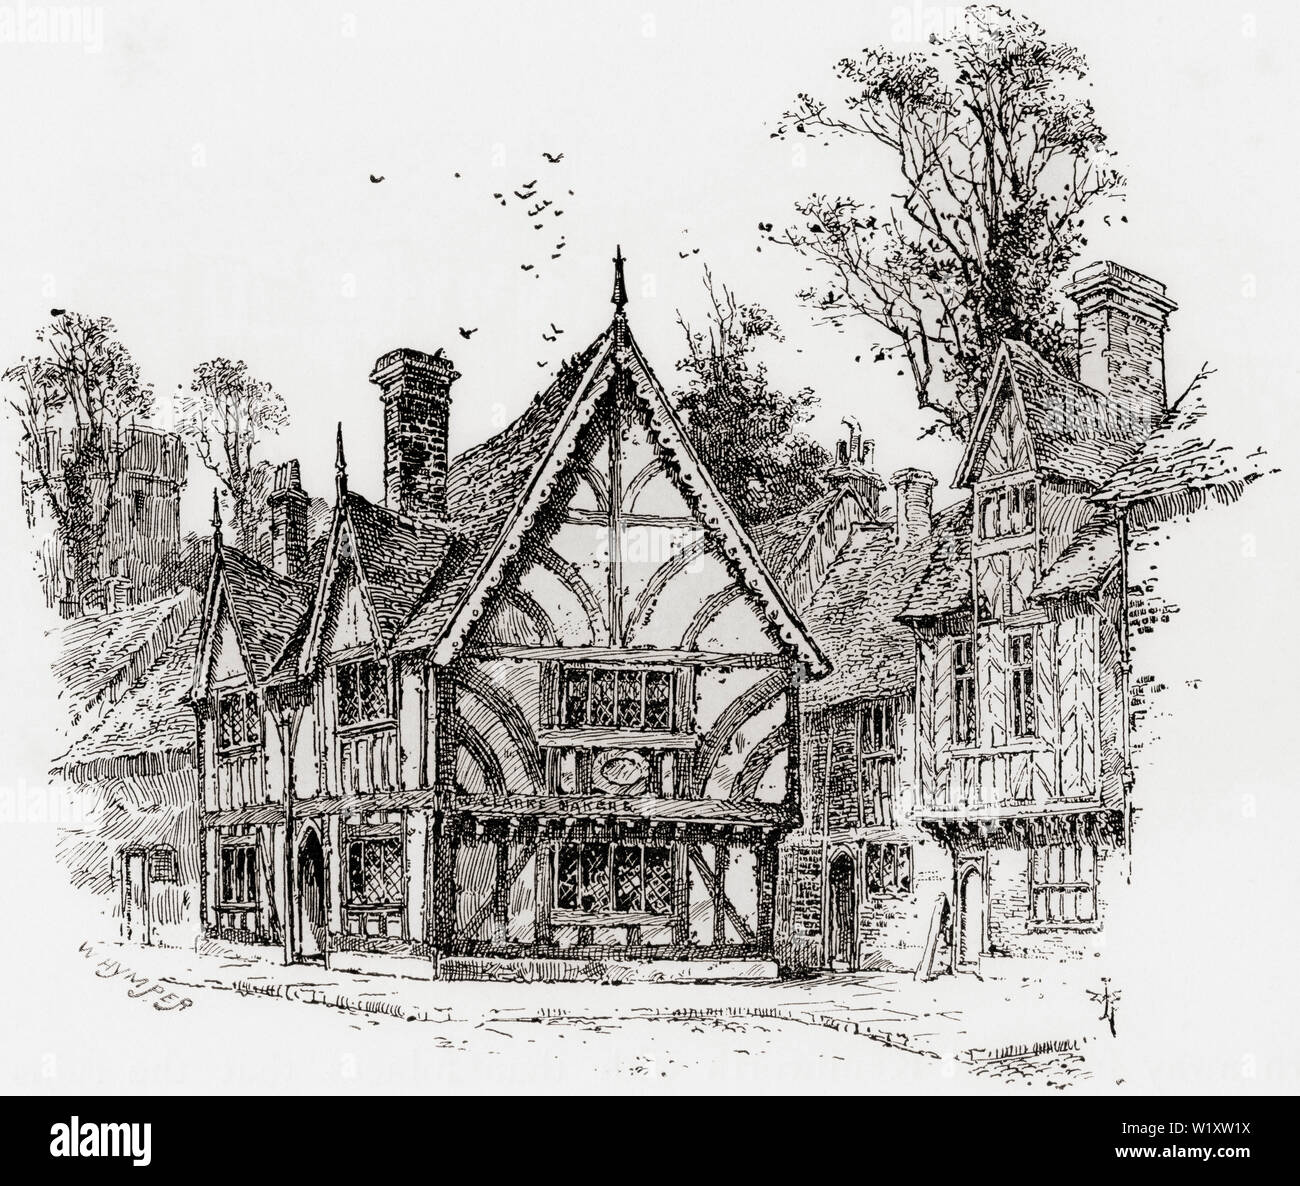 An old half- timbered house in Castle Street, Warwick, Warwickshire, England, seen here in the 19th century.  From English Pictures, published 1890. Stock Photo